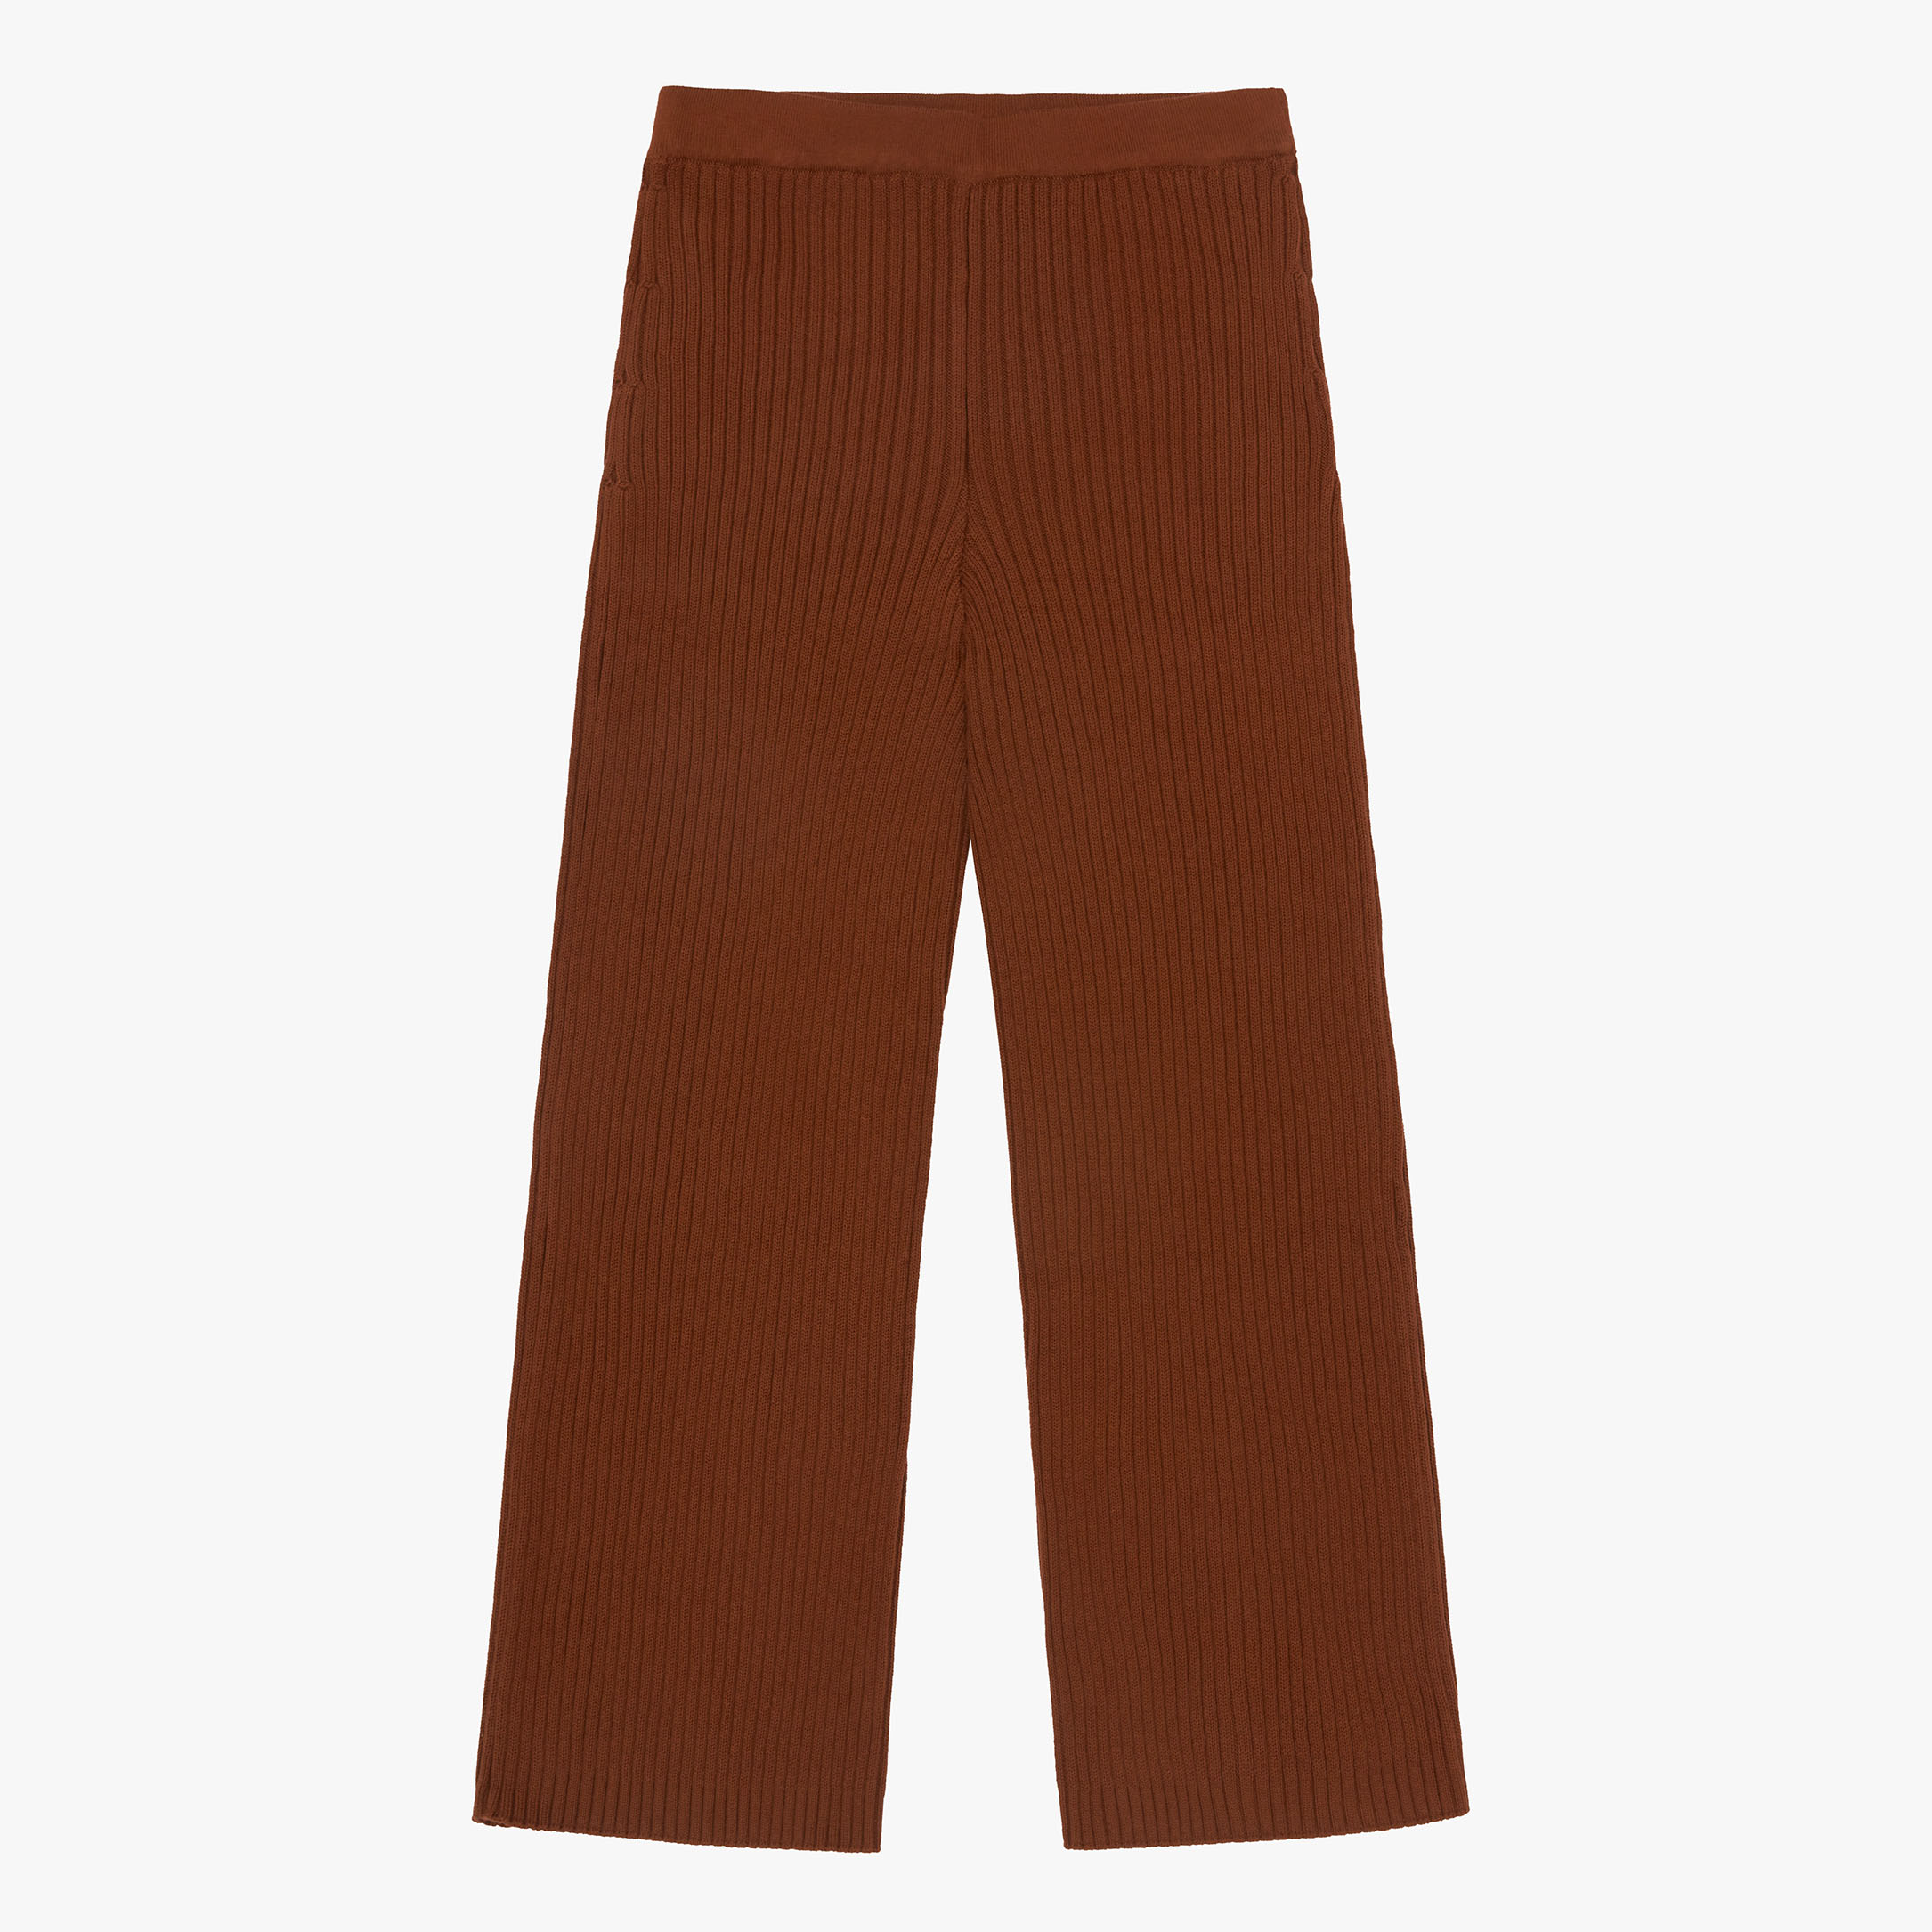 Diarte Silvestre Knitted Cotton Trousers